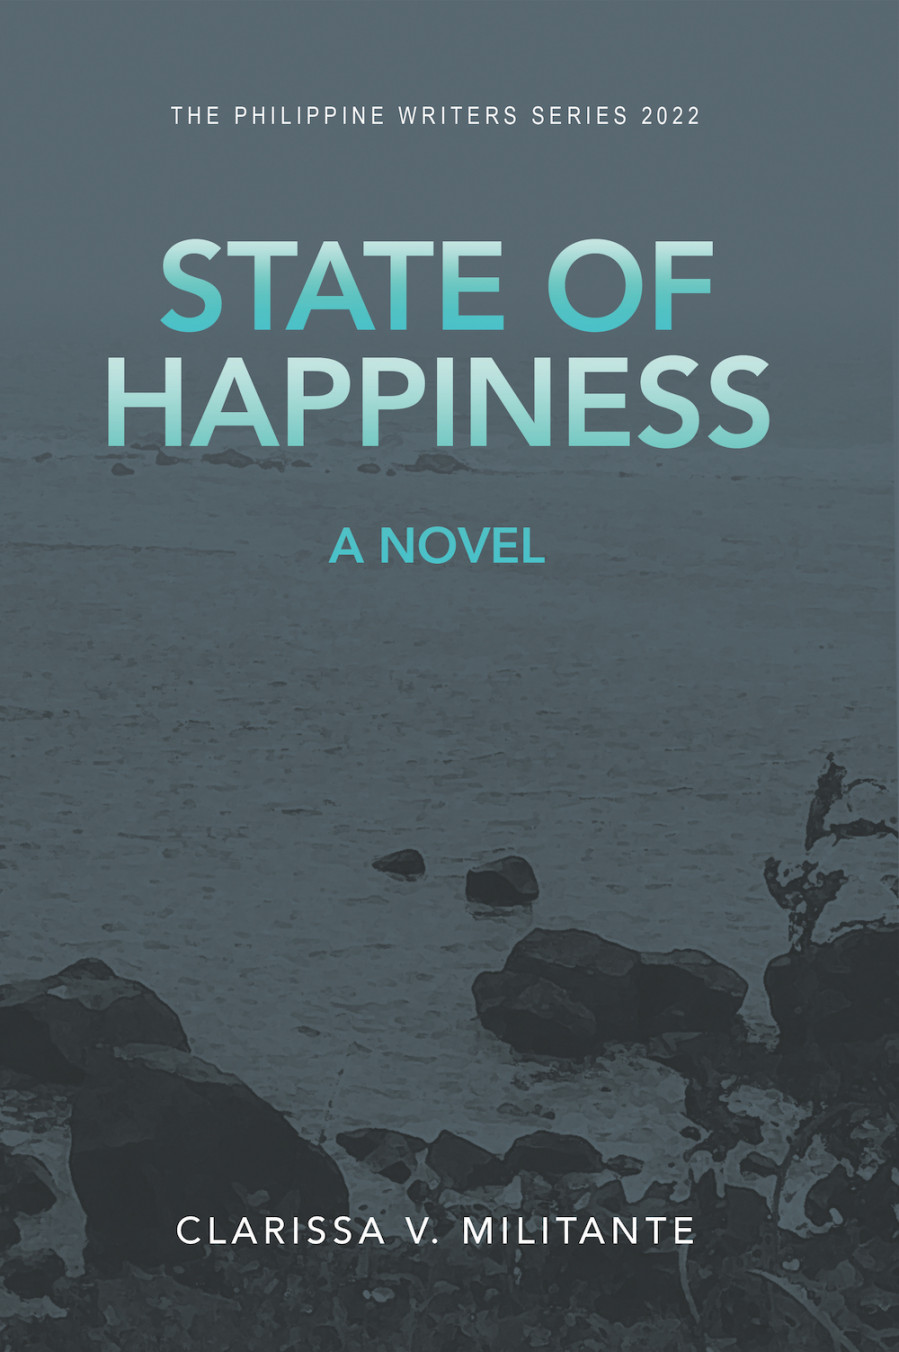 State of happiness a novel